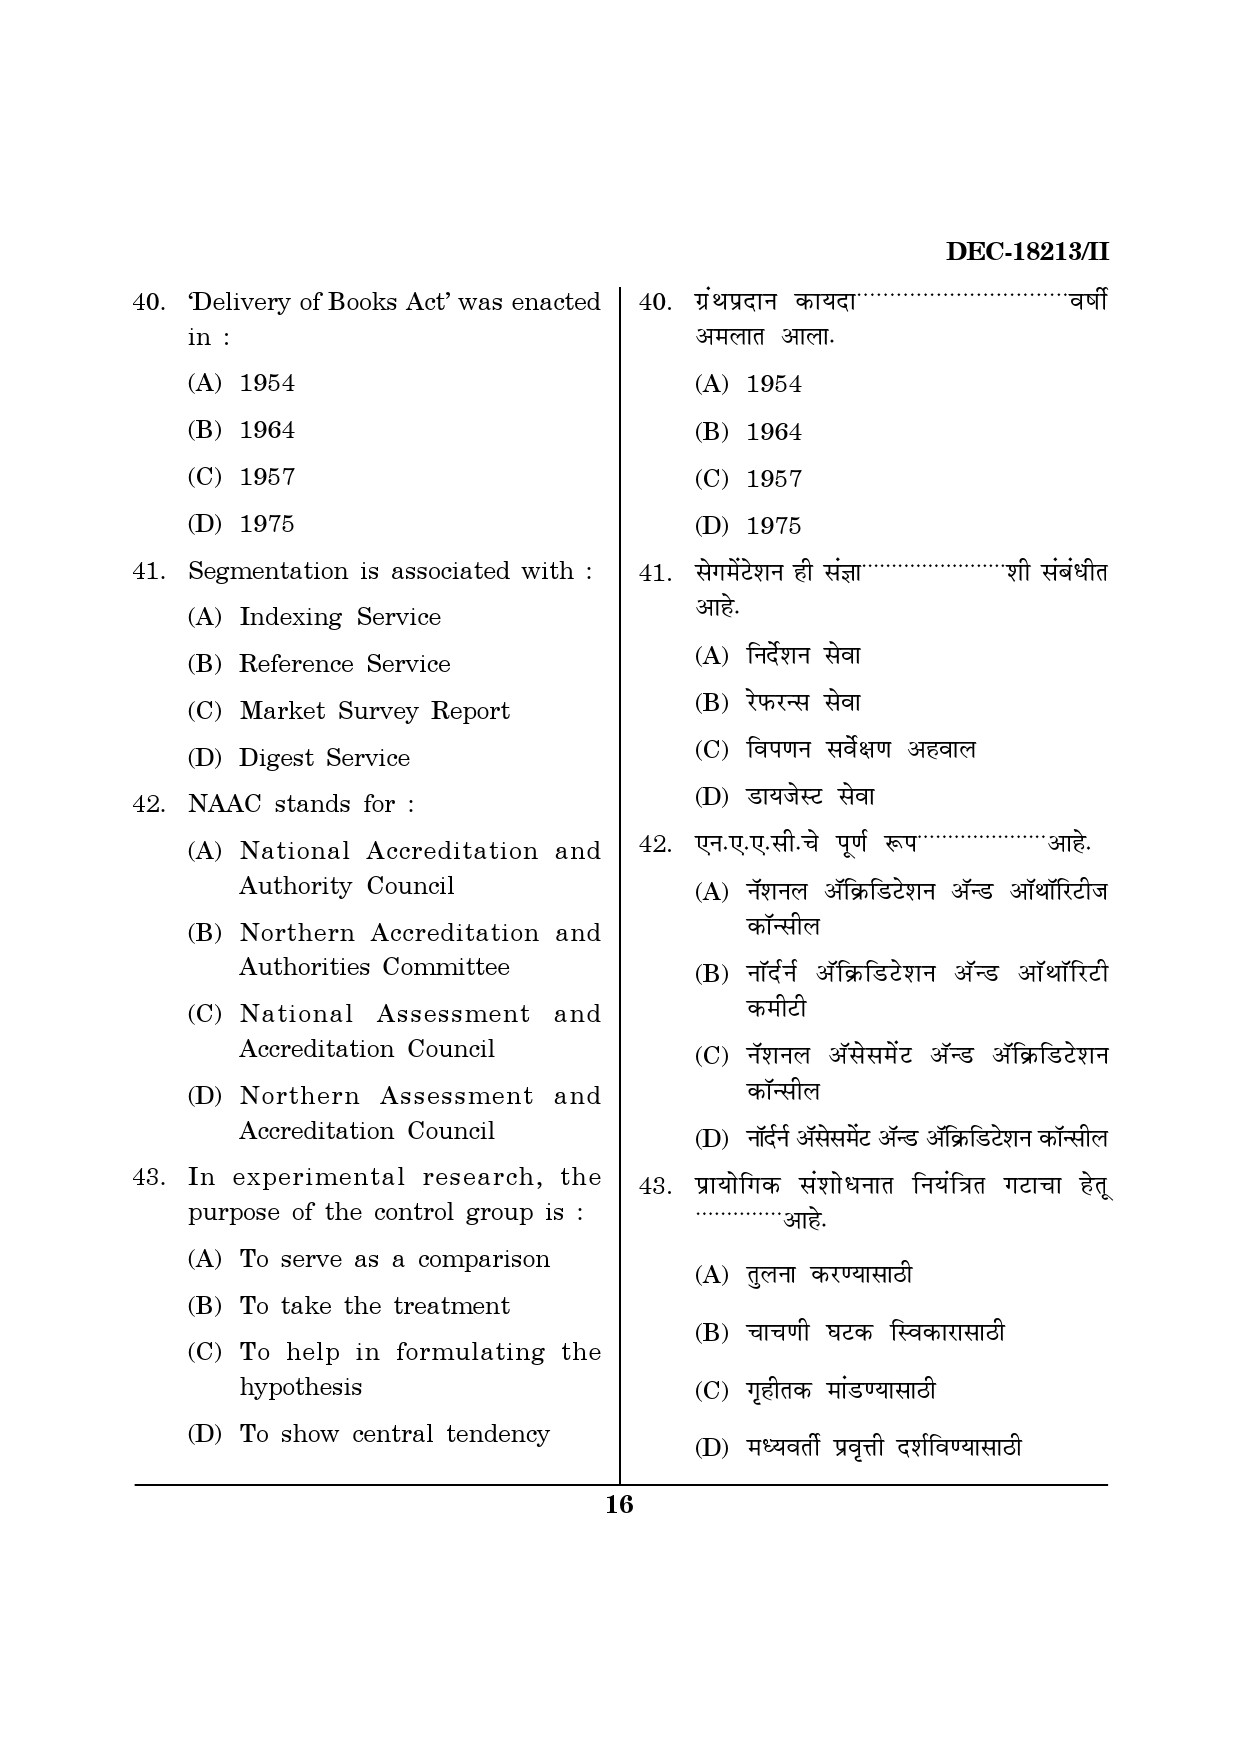 Maharashtra SET Library Information Science Question Paper II December 2013 15